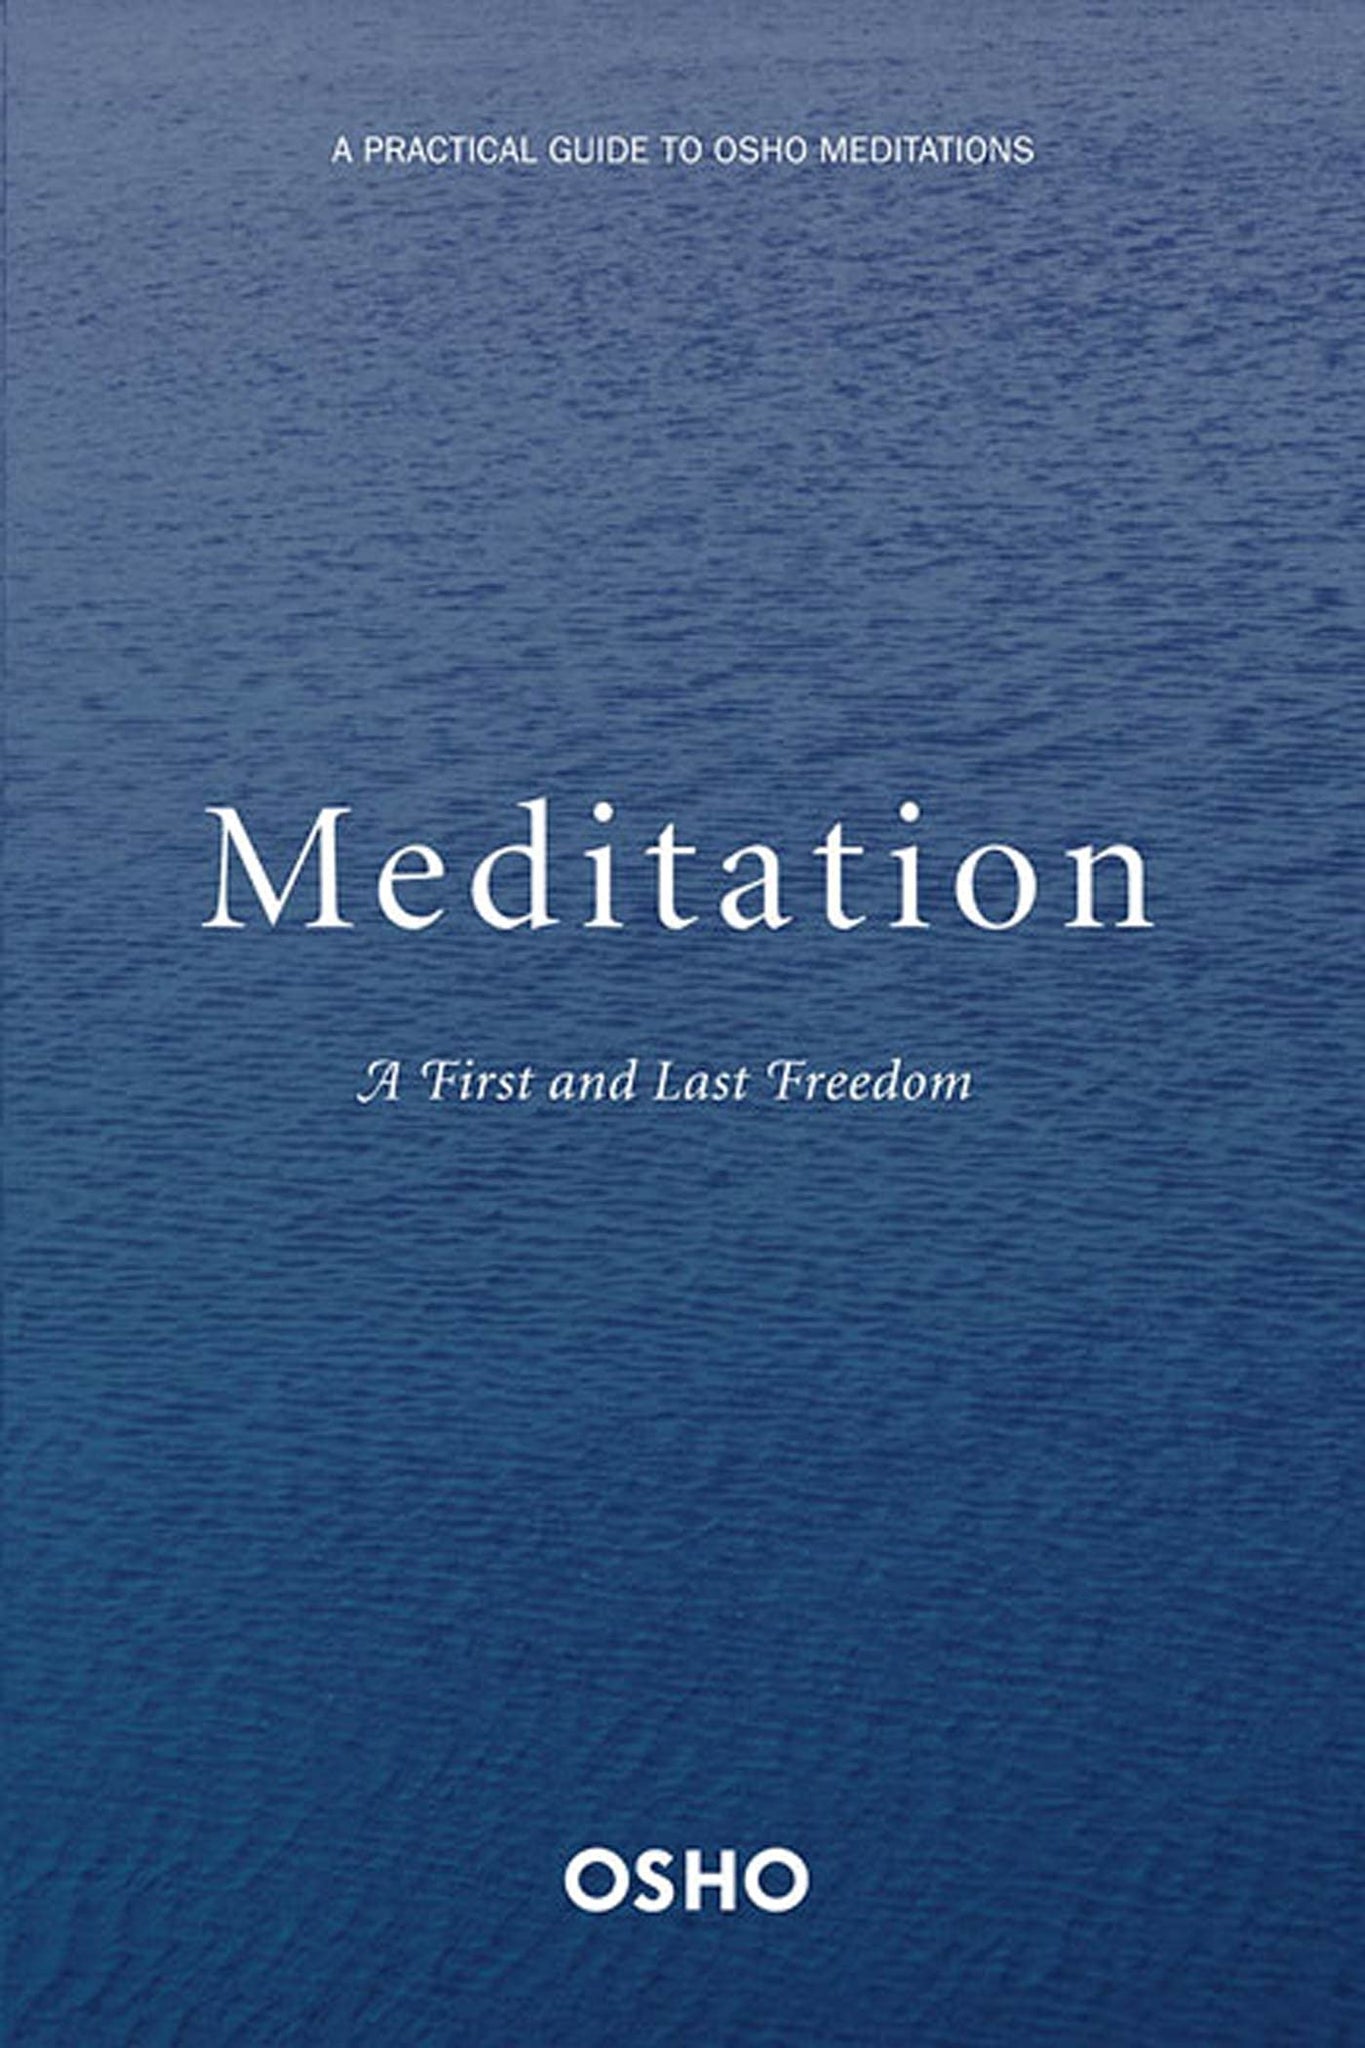 Meditation: The First and Last Freedom by Osho